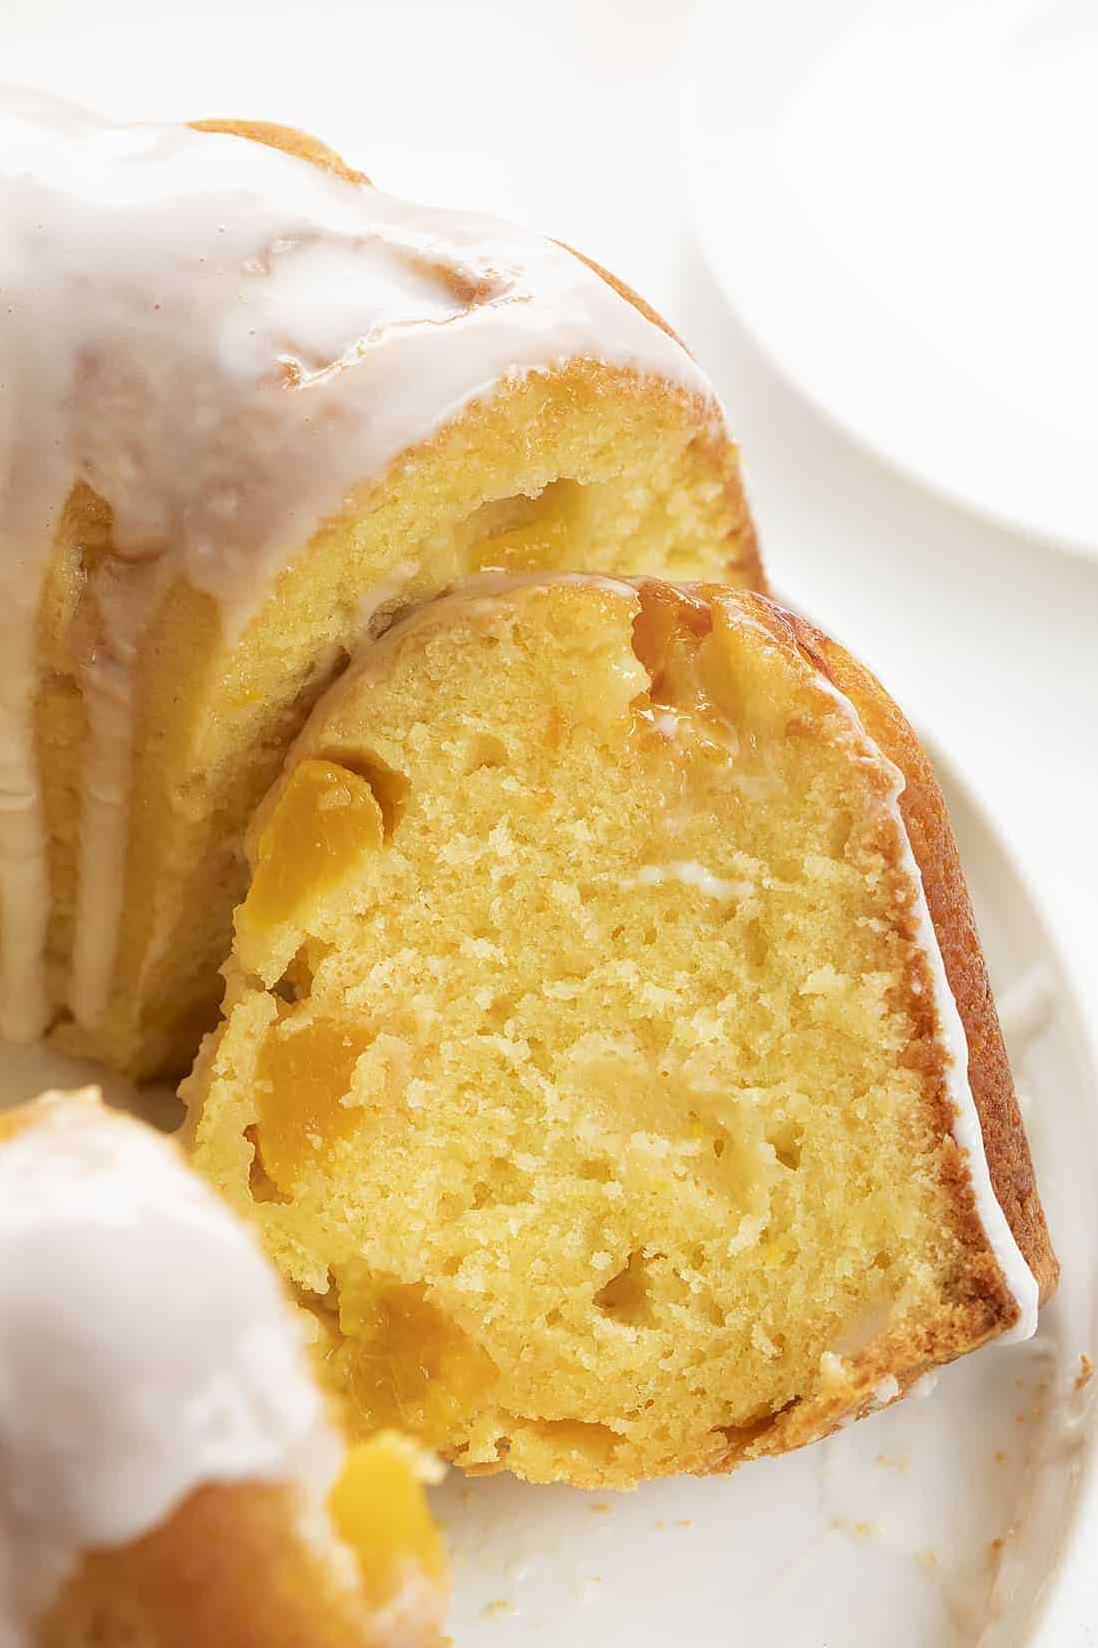  One slice won't be enough of this delicious peachy pound cake